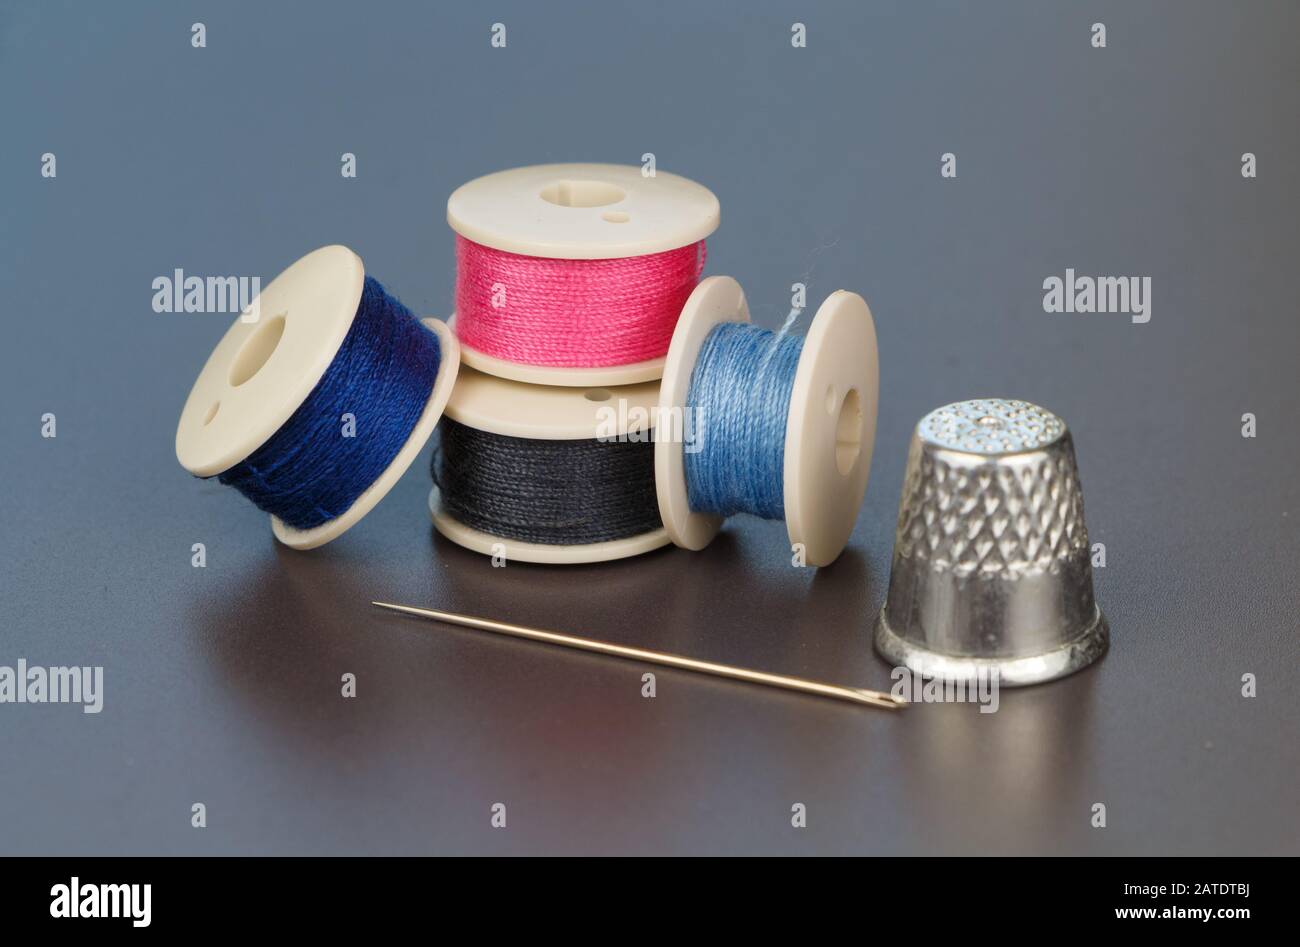 Blue, gray and pink reels of thread for sewing, needle and thimble Stock Photo